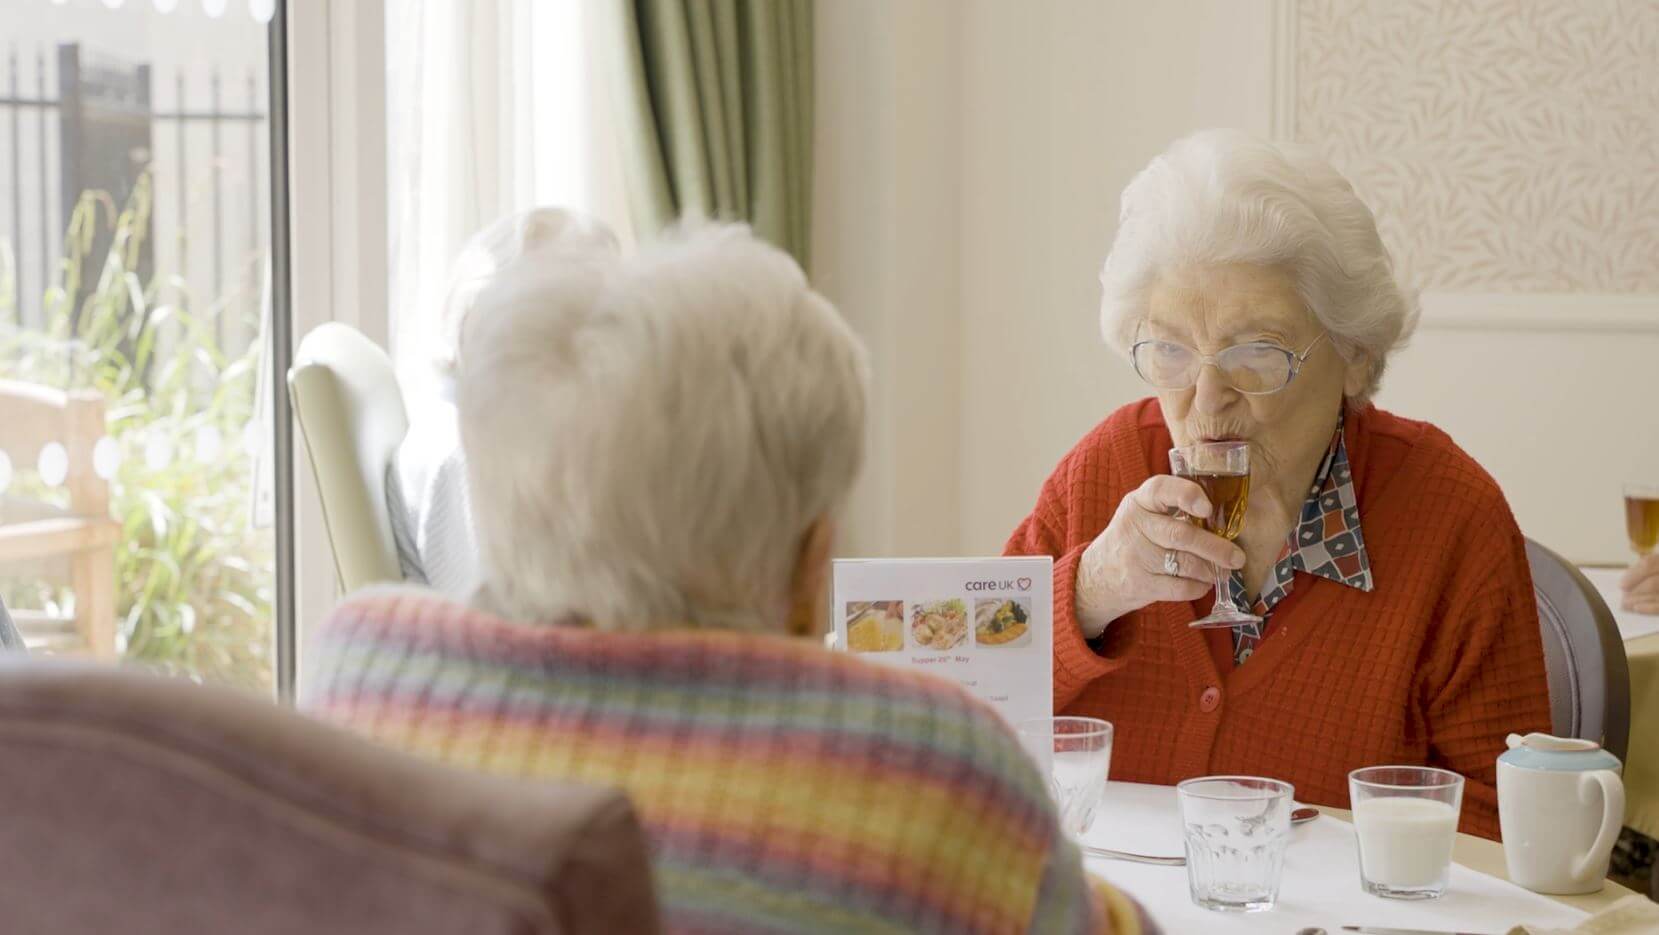 Dining with dignity at Ferndown Manor